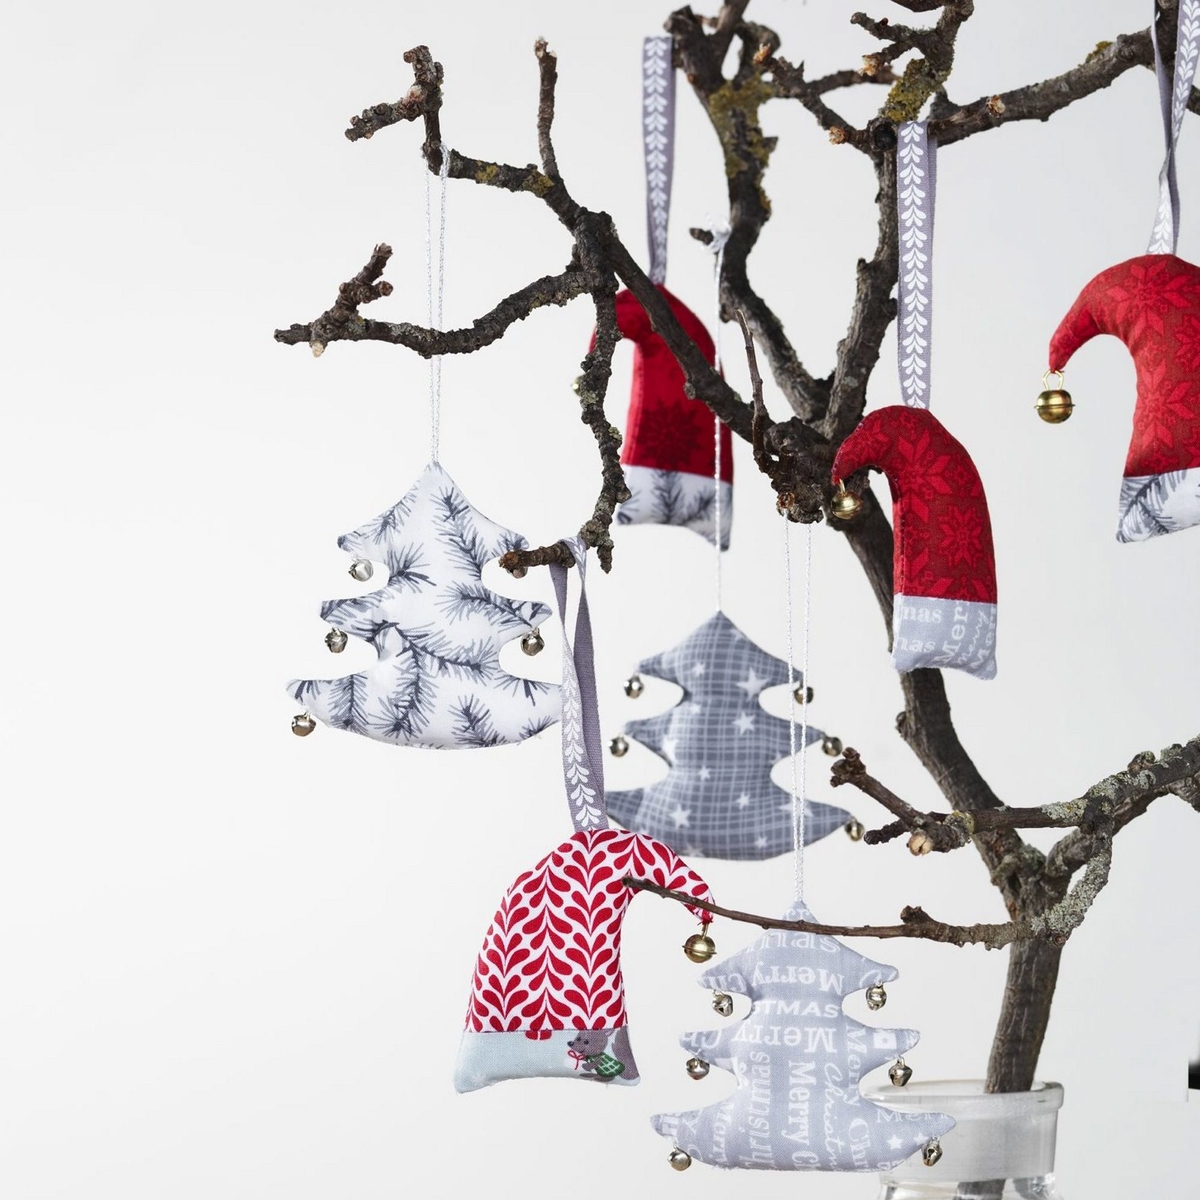 Sew Christmas ornaments for the tree